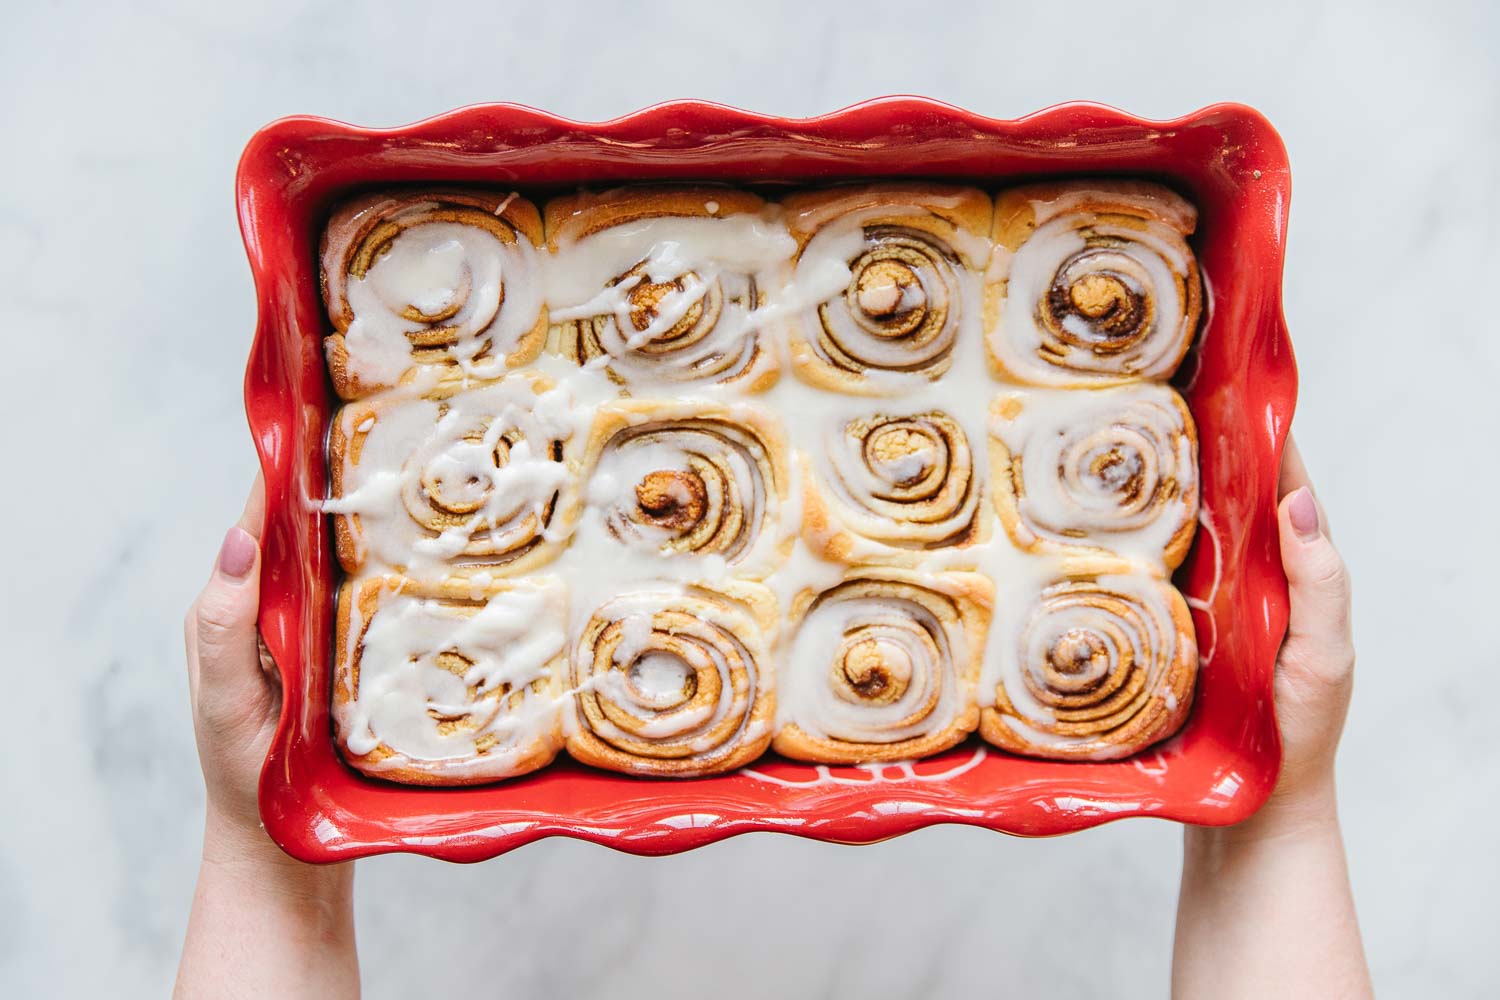 A final pan of iced cinnamon rolls with two hands holding it.